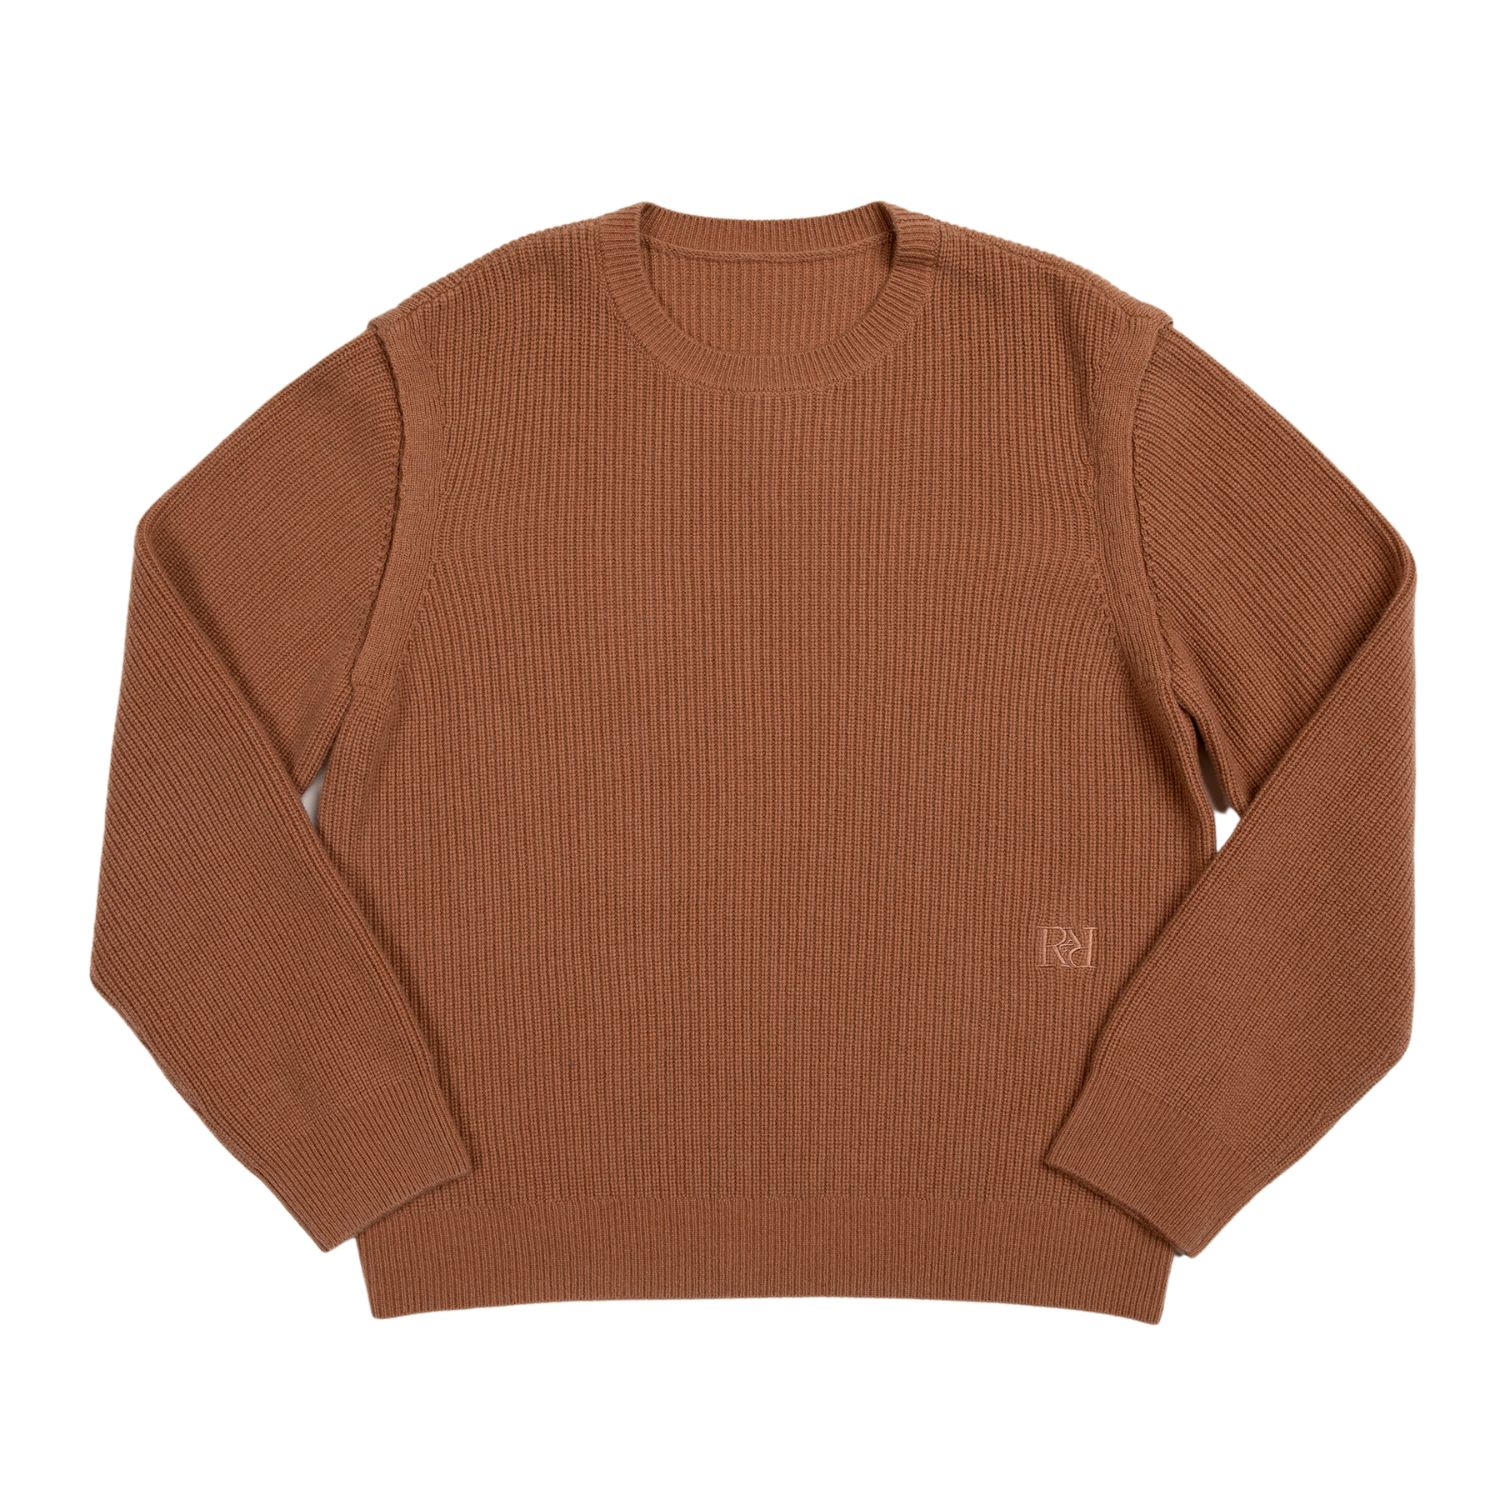 Women’s Brown Convertible Cashmere Sweater - Toast Small Rest & Relax